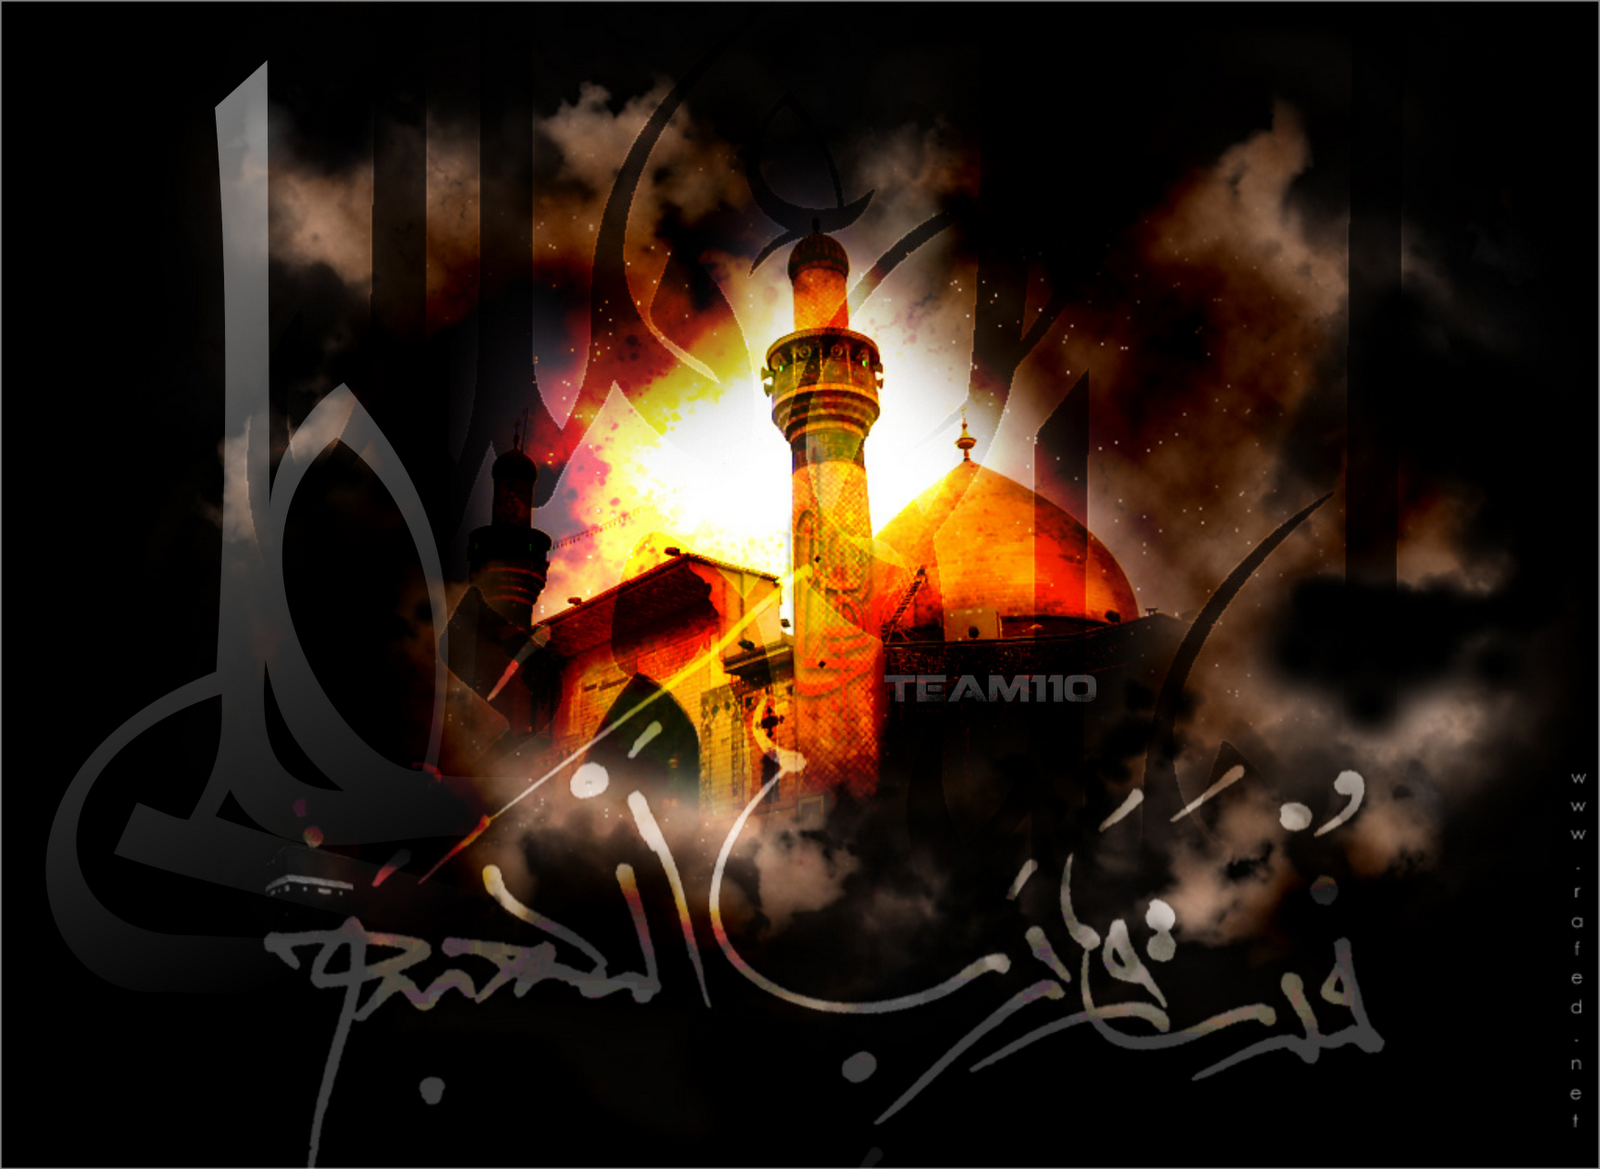 TEAM 110 Wallpapers: 2 Hazrat Imam Ali (a.s.) Wallpapers